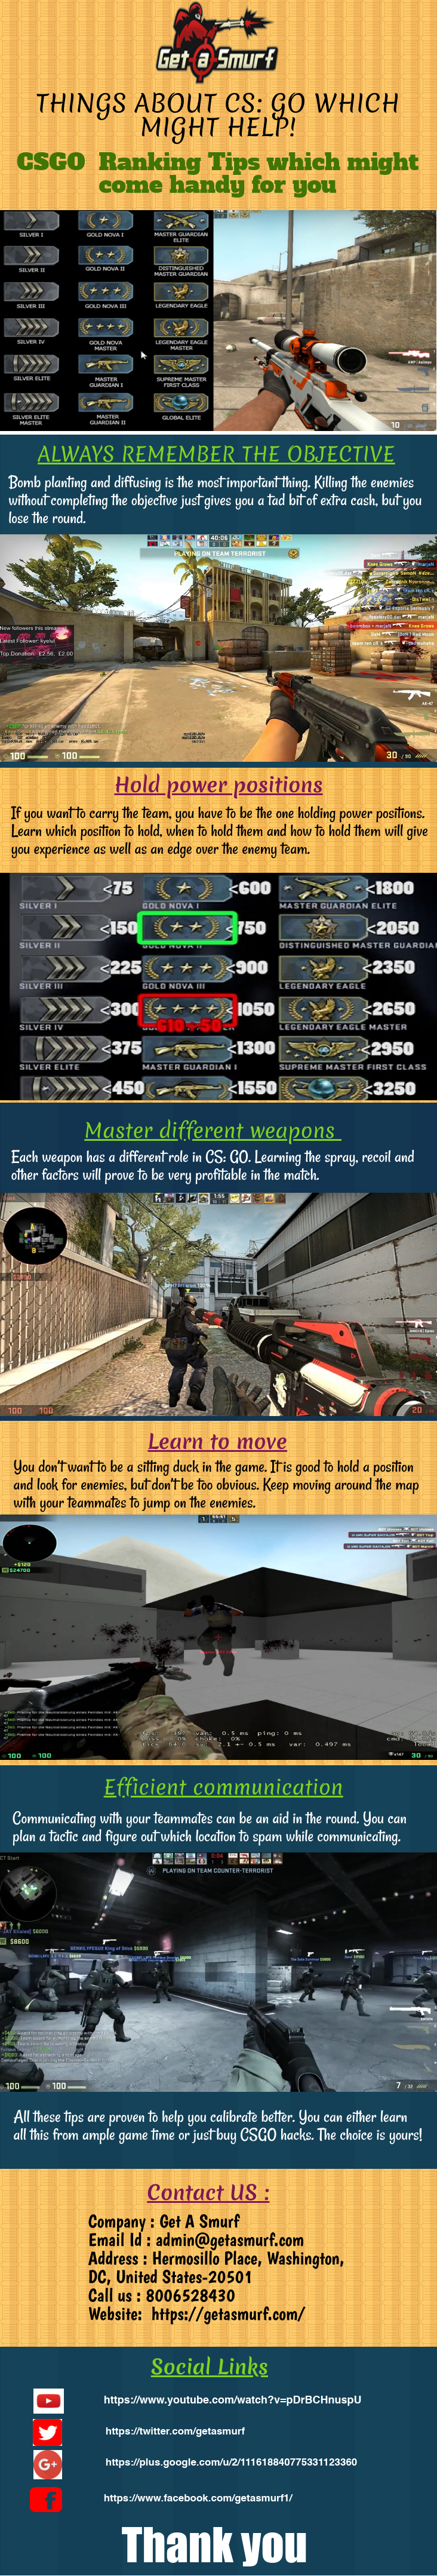 Things About CS:GO Which Might Help!